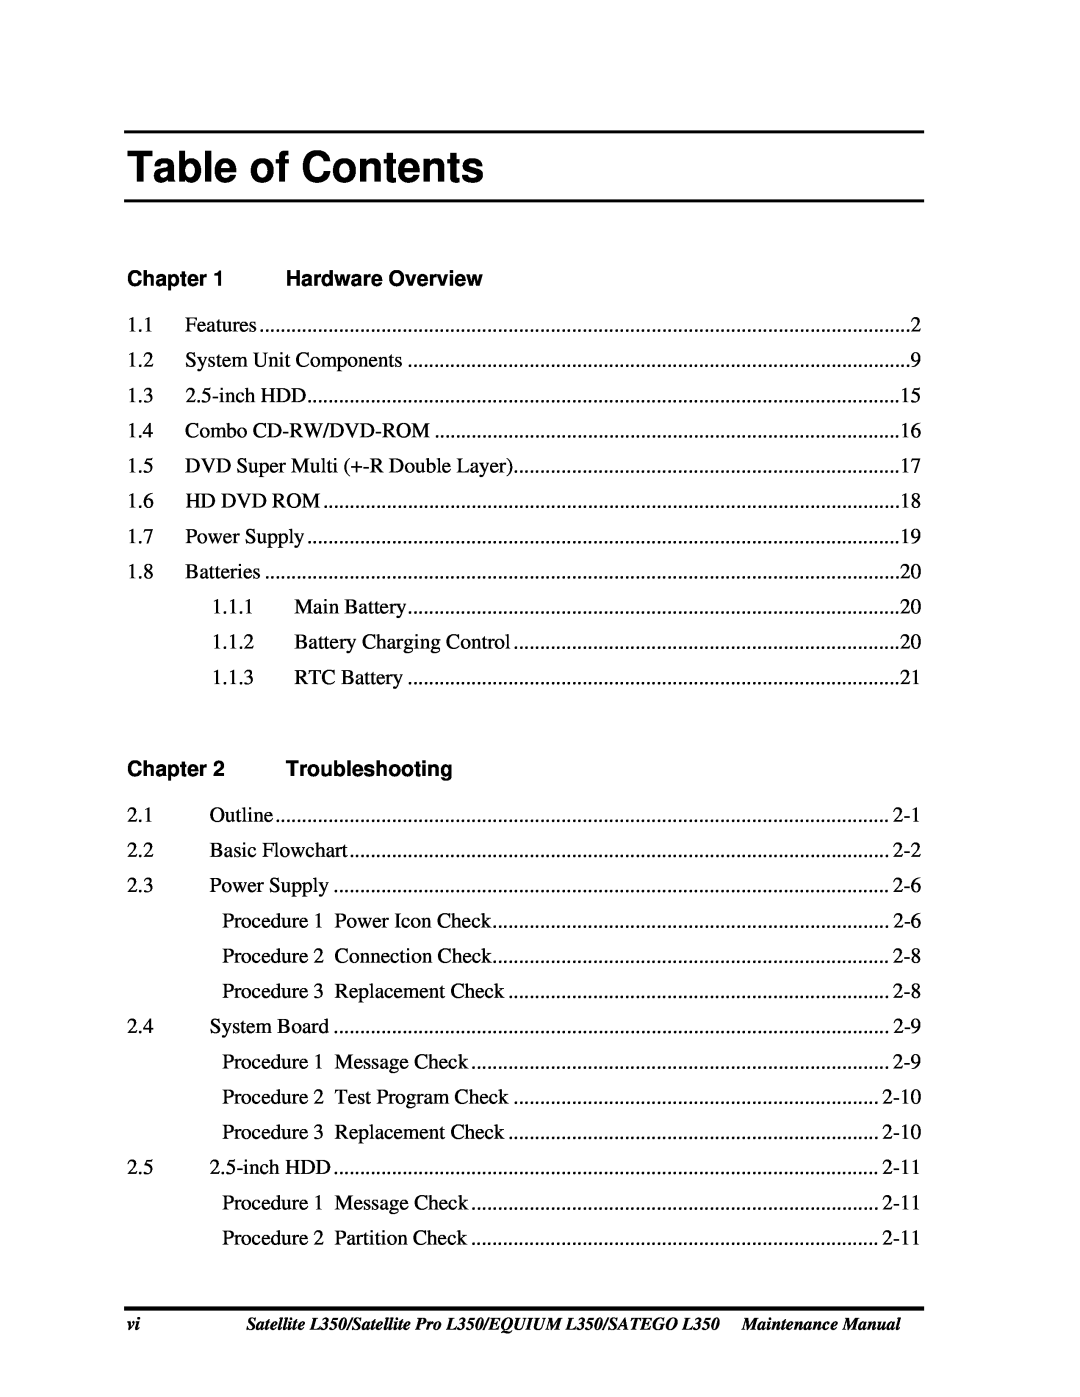 Toshiba PSLD1X, PSLD2X, PSLD3X manual Table of Contents, Chapter, Hardware Overview, Troubleshooting 